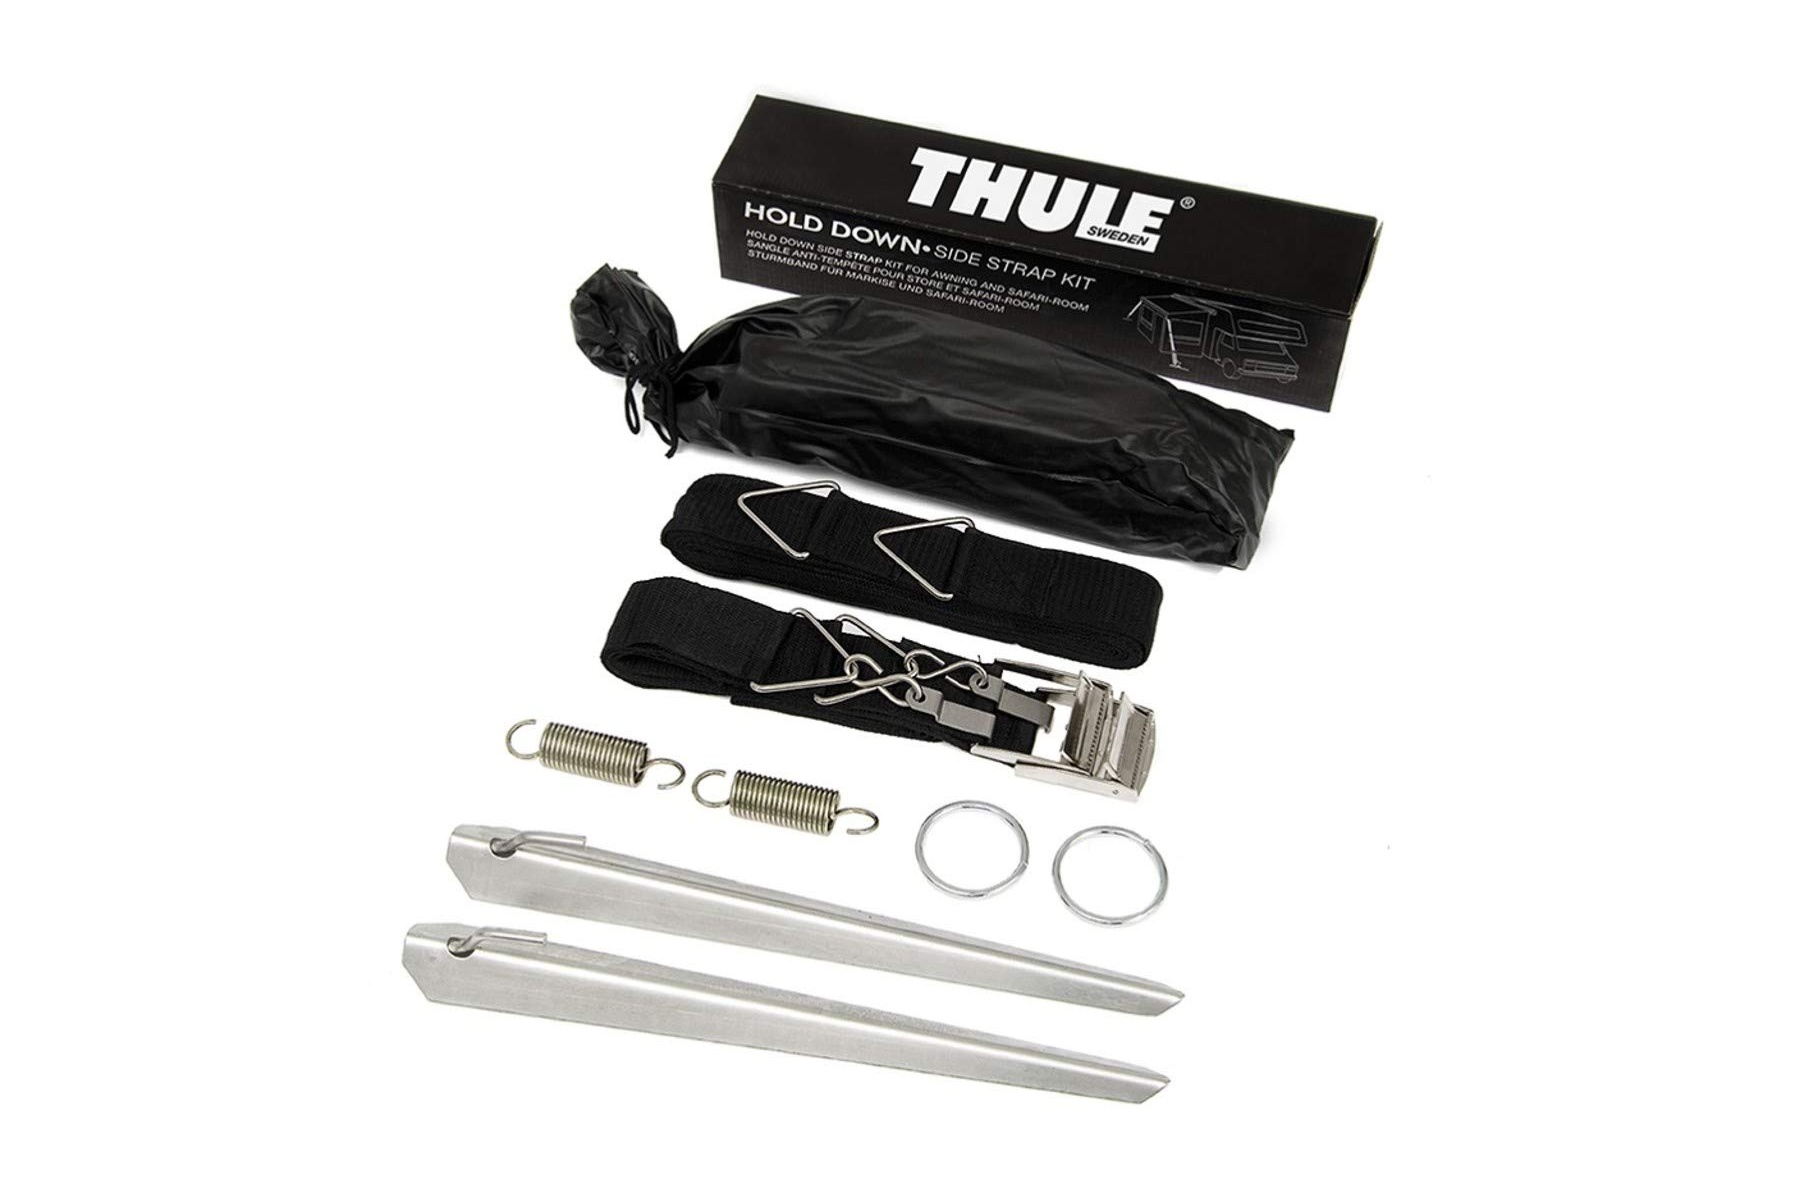 thule hold down side strap kit